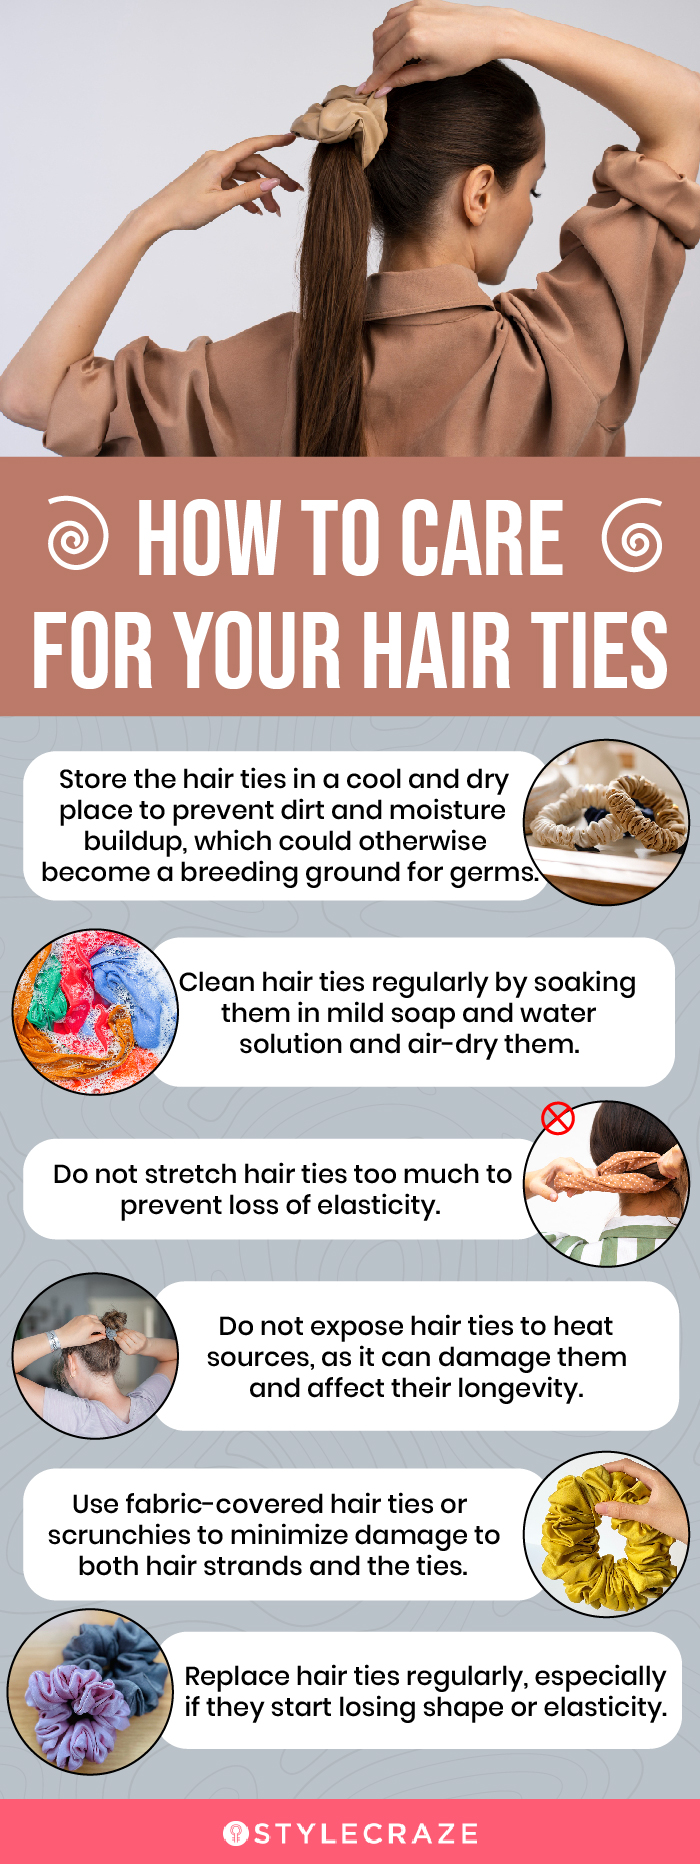 How To Care For Your Hair Ties (infographic)